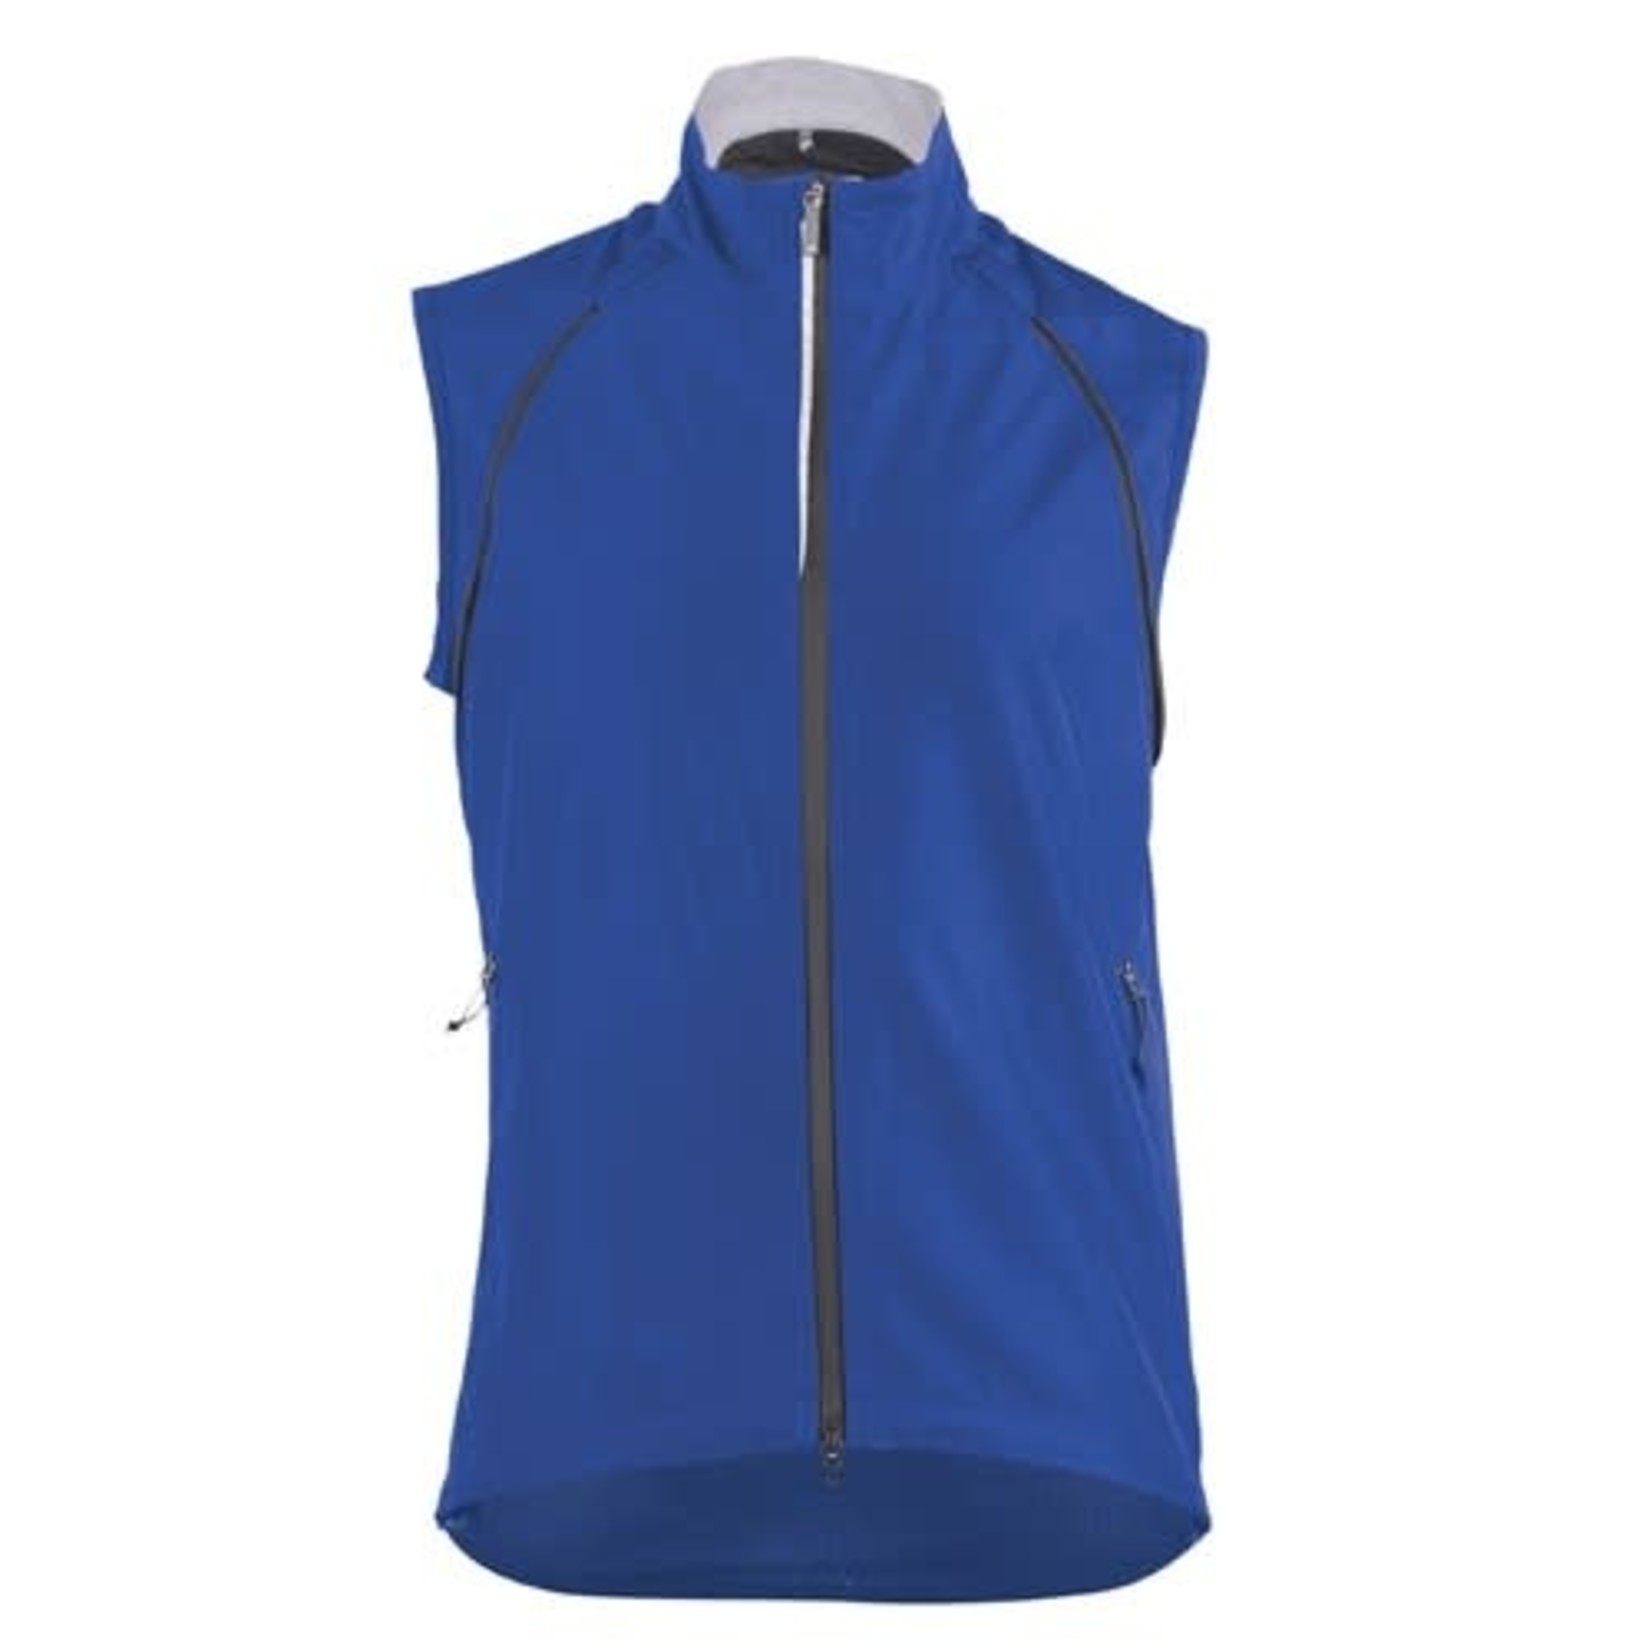 Bellwether Bellwether Cycling Jacket Velocity Convertible Jacket 2022 - Royal